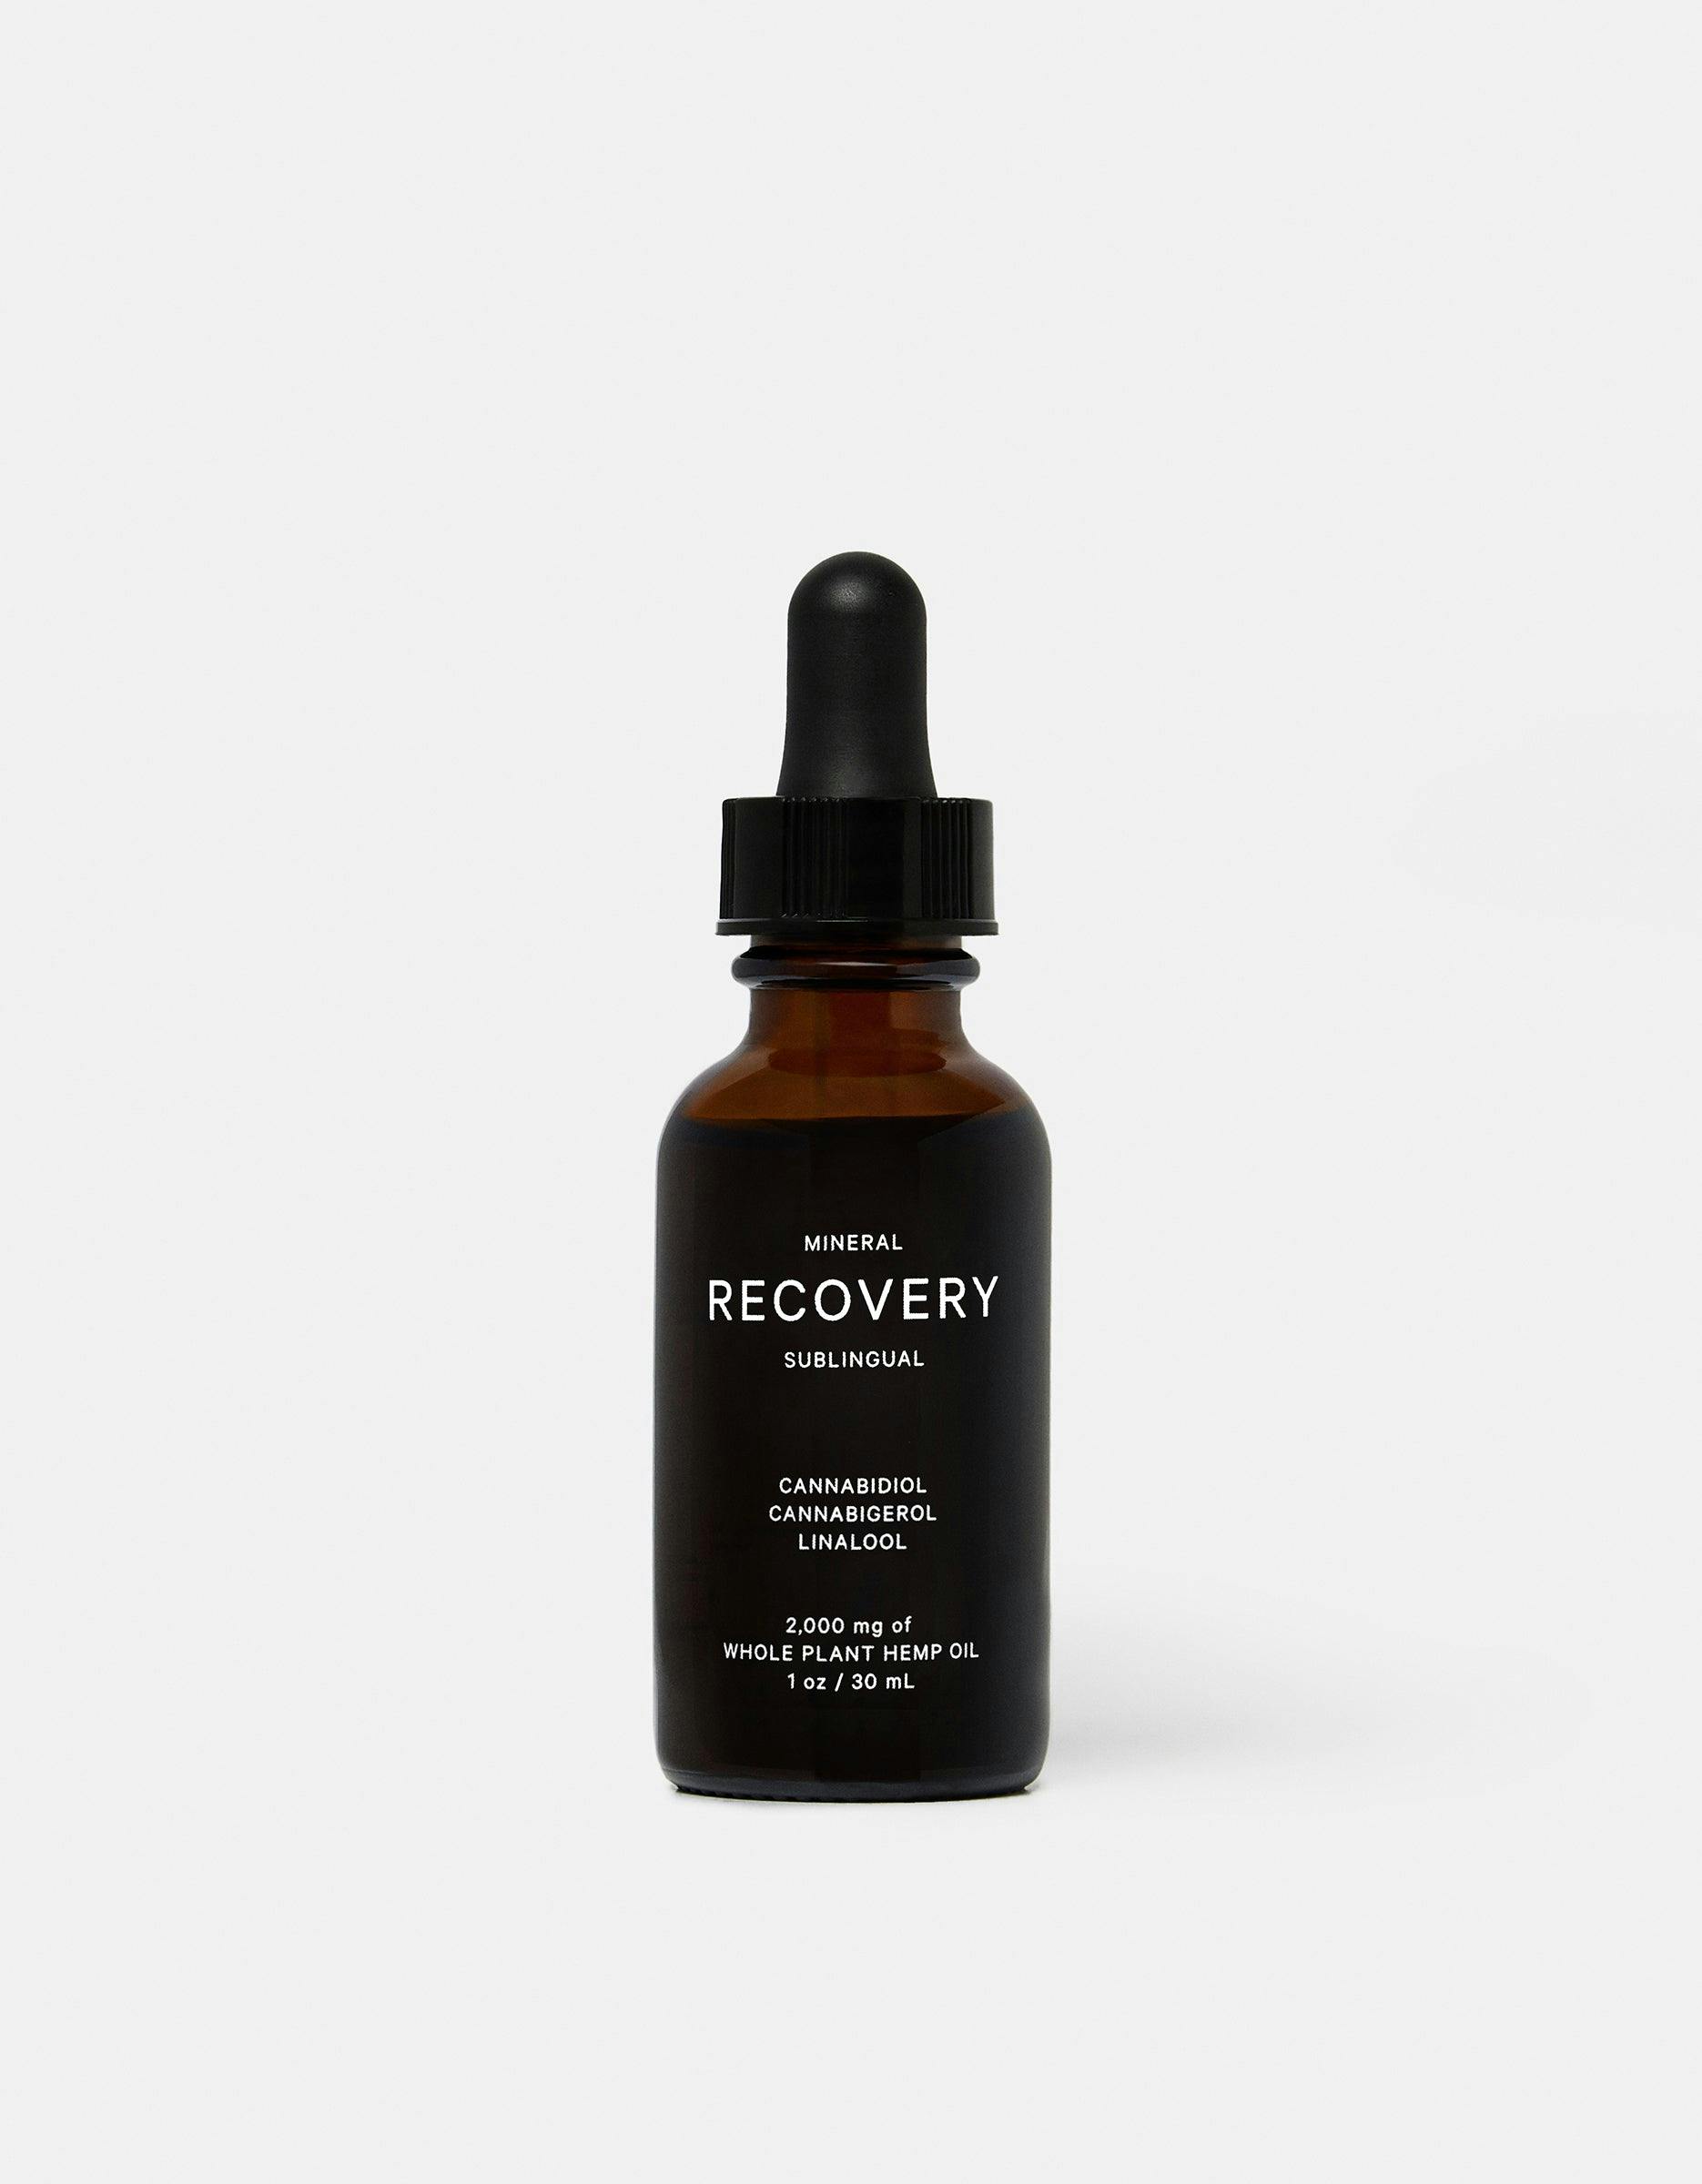 MINERAL RECOVERY product